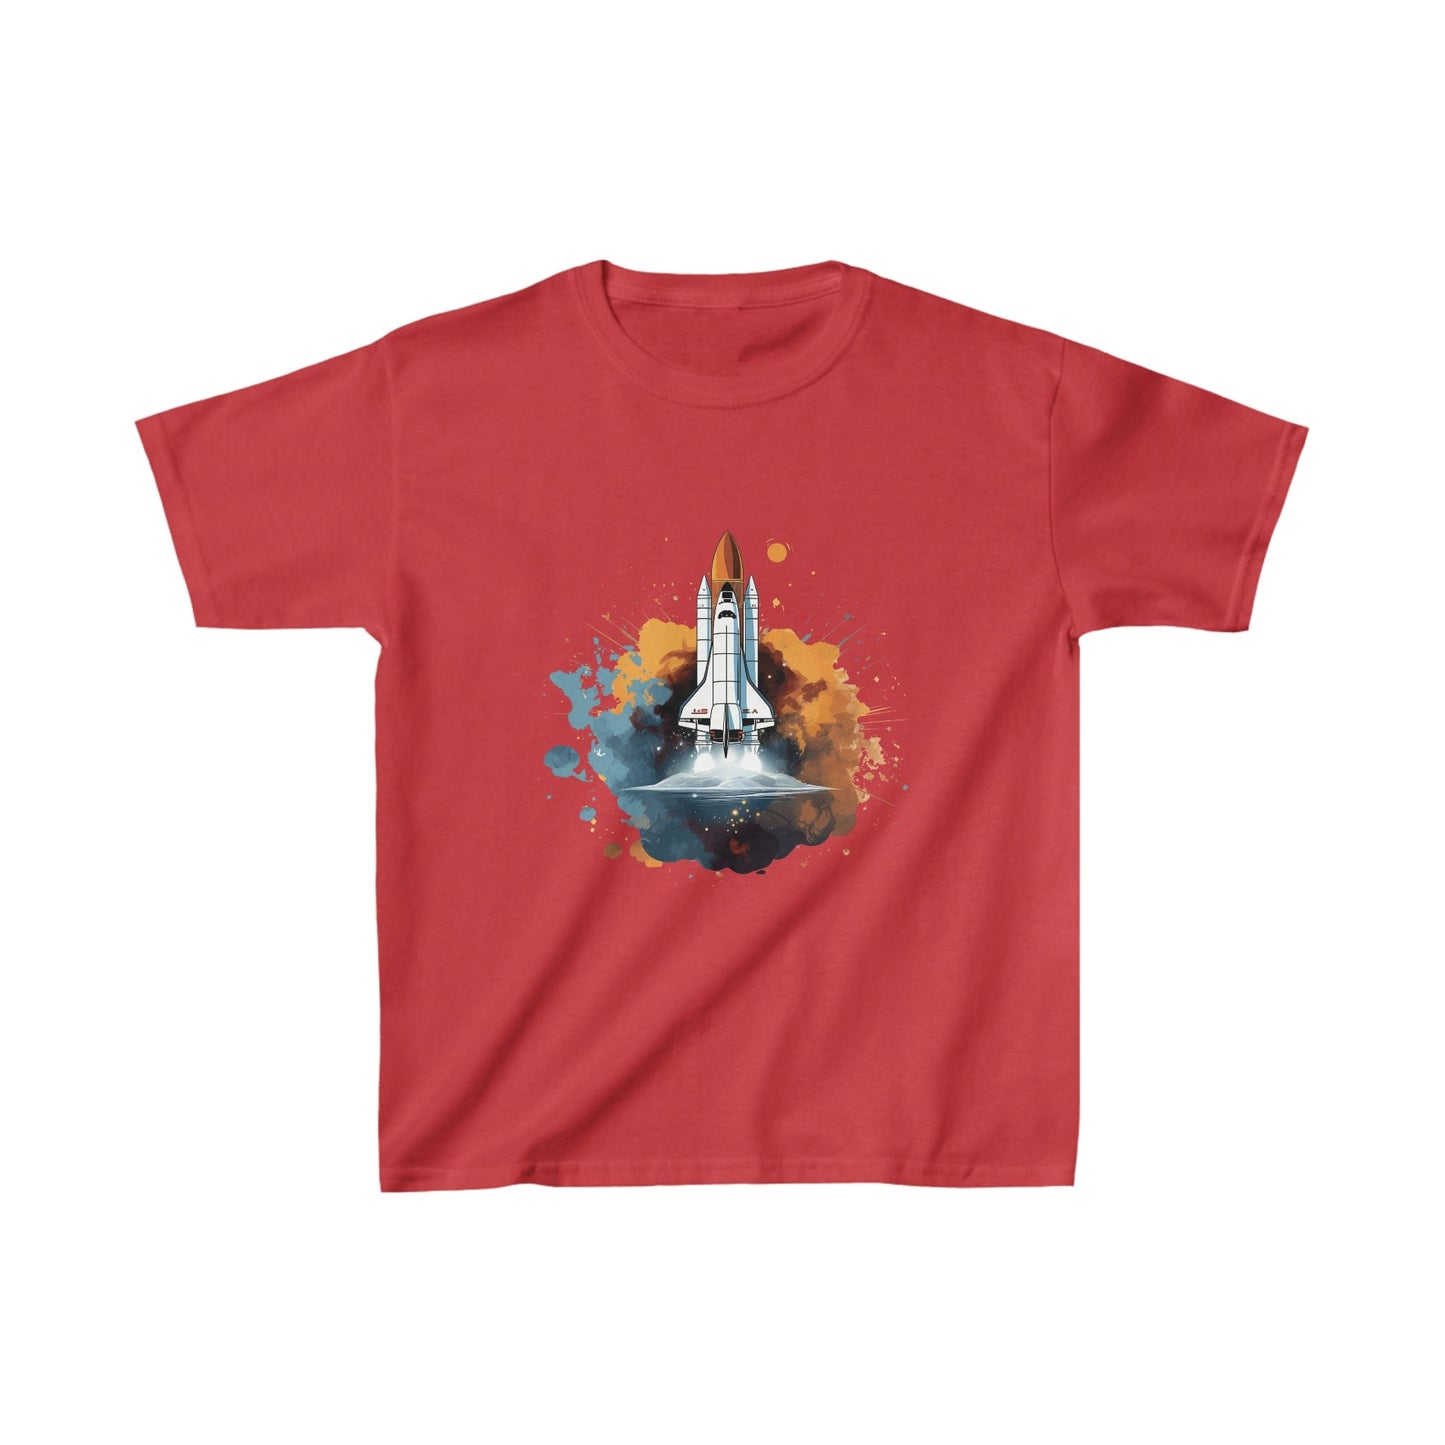 Kids clothes XS / Red Youth Space Shuttle Splash T-Shirt